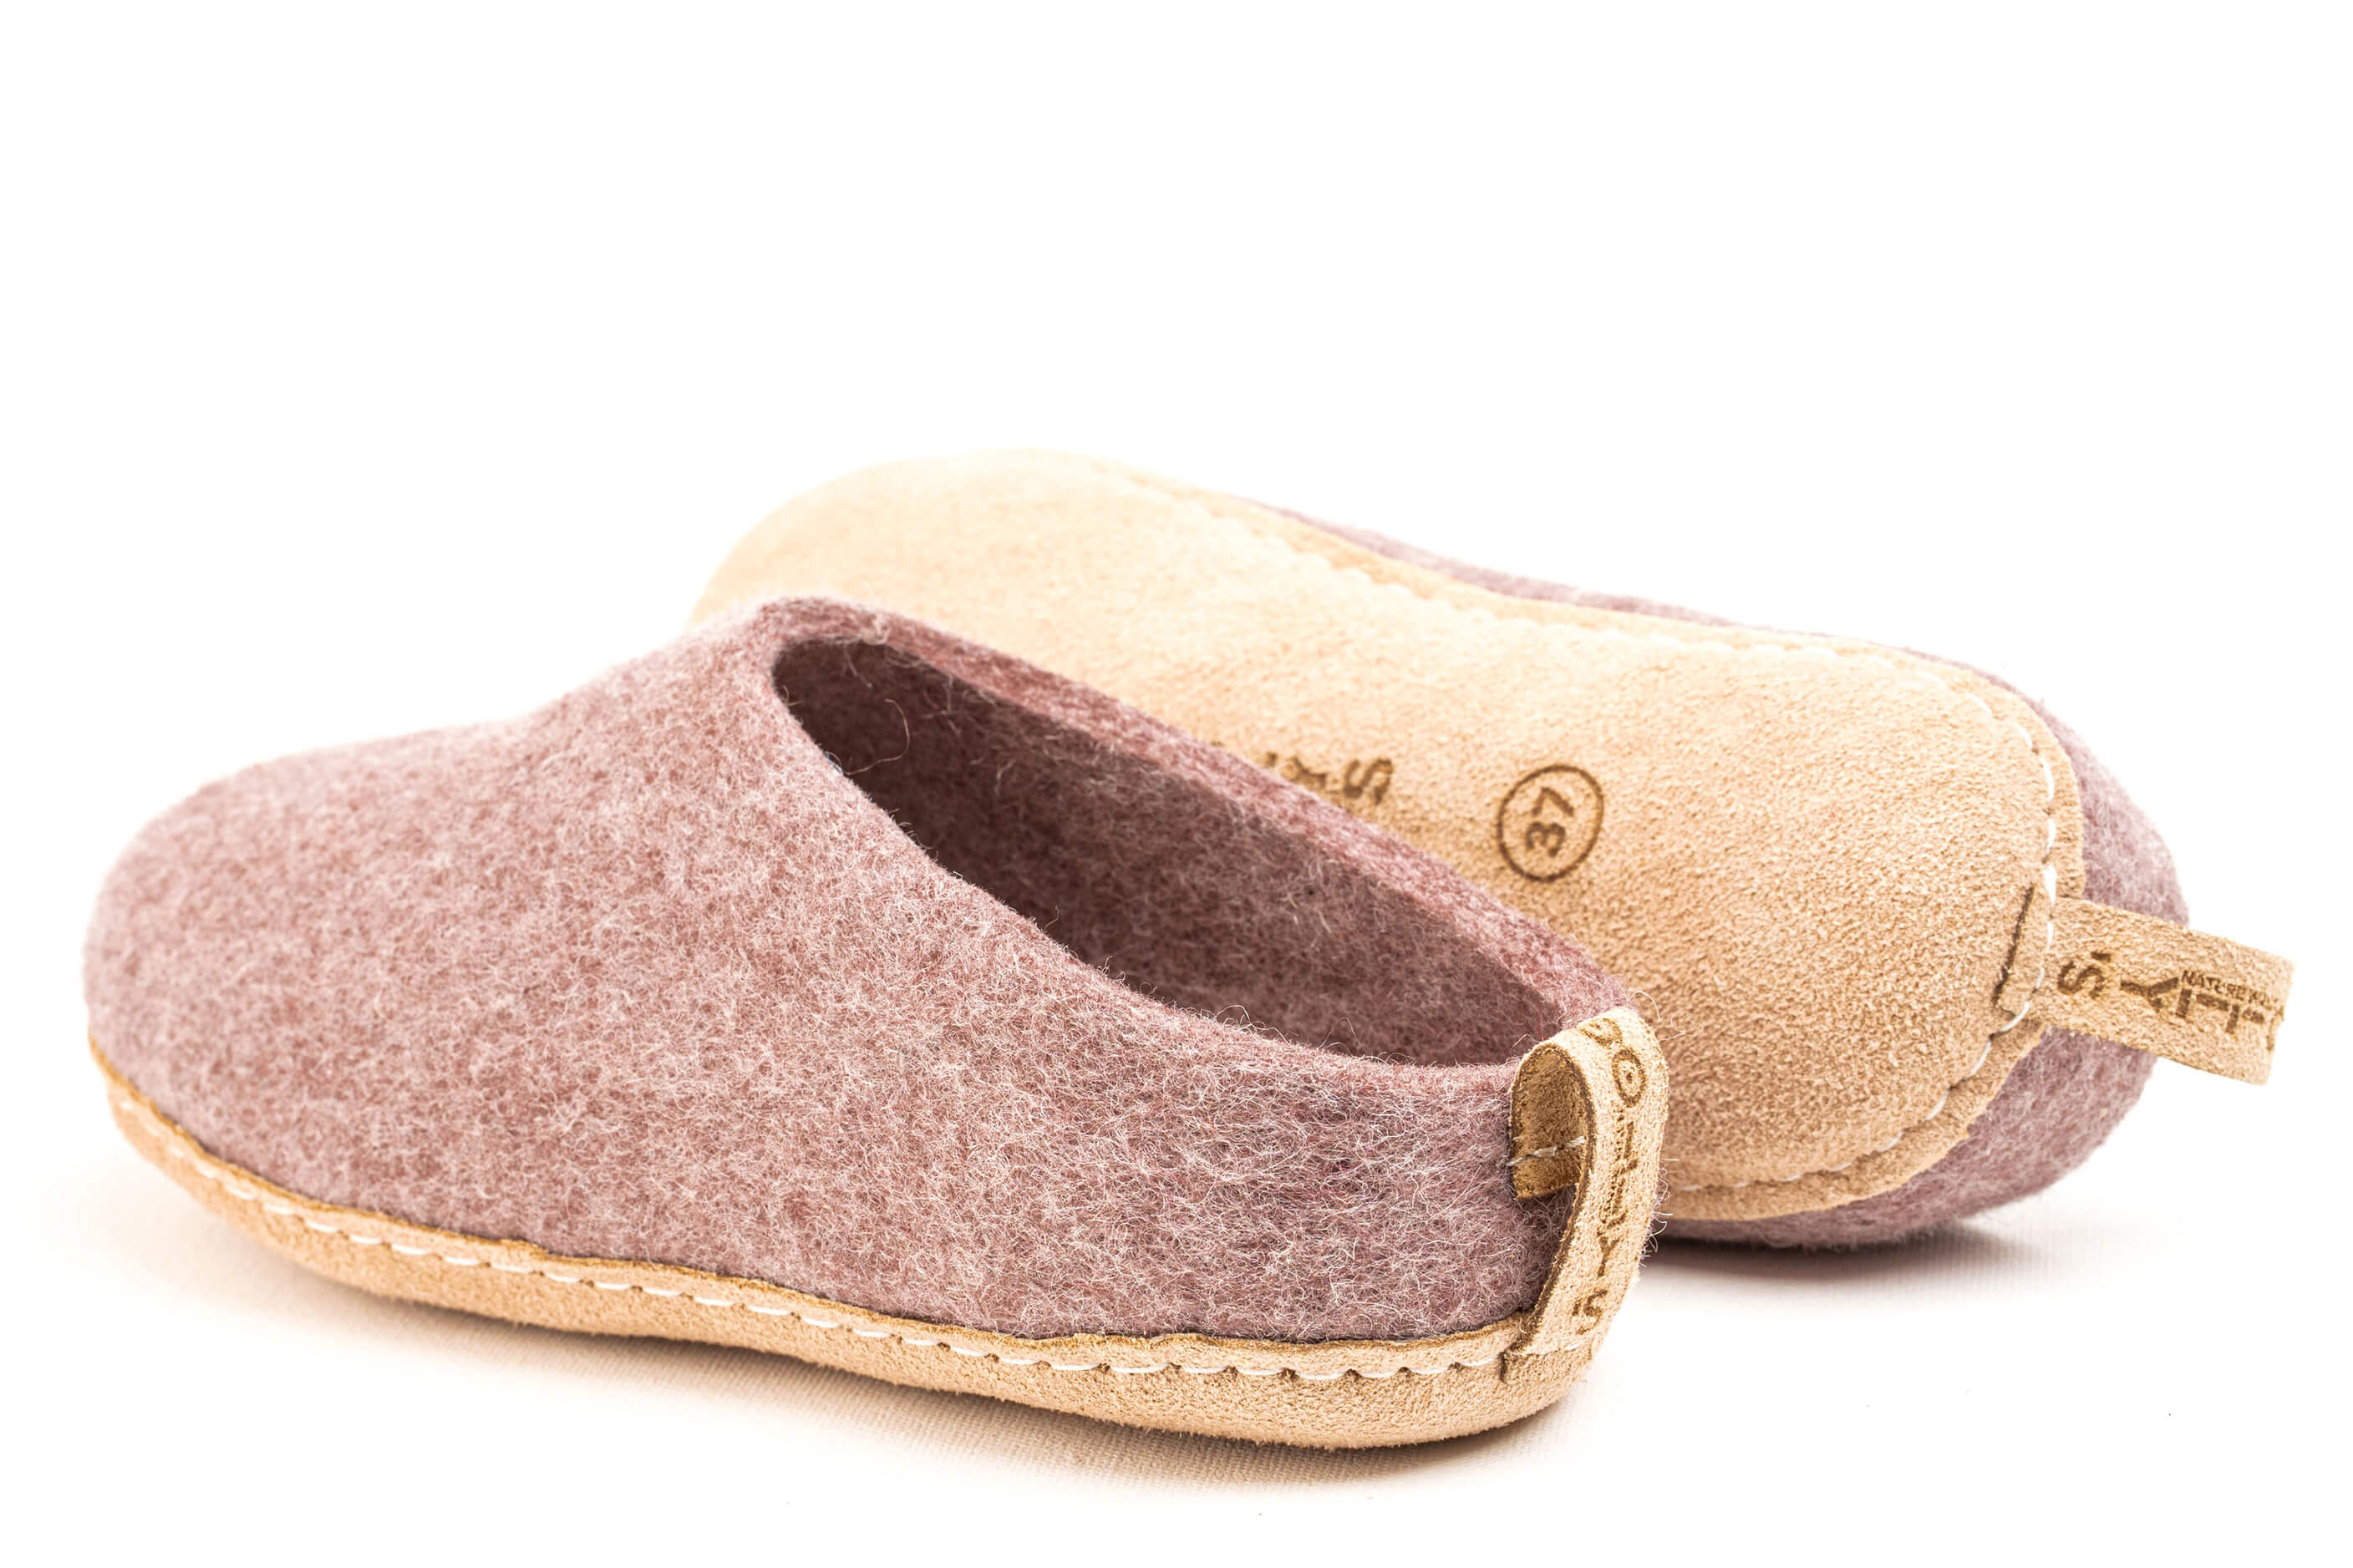 Indoor Open Heel Slippers With Leather Sole - Lavender